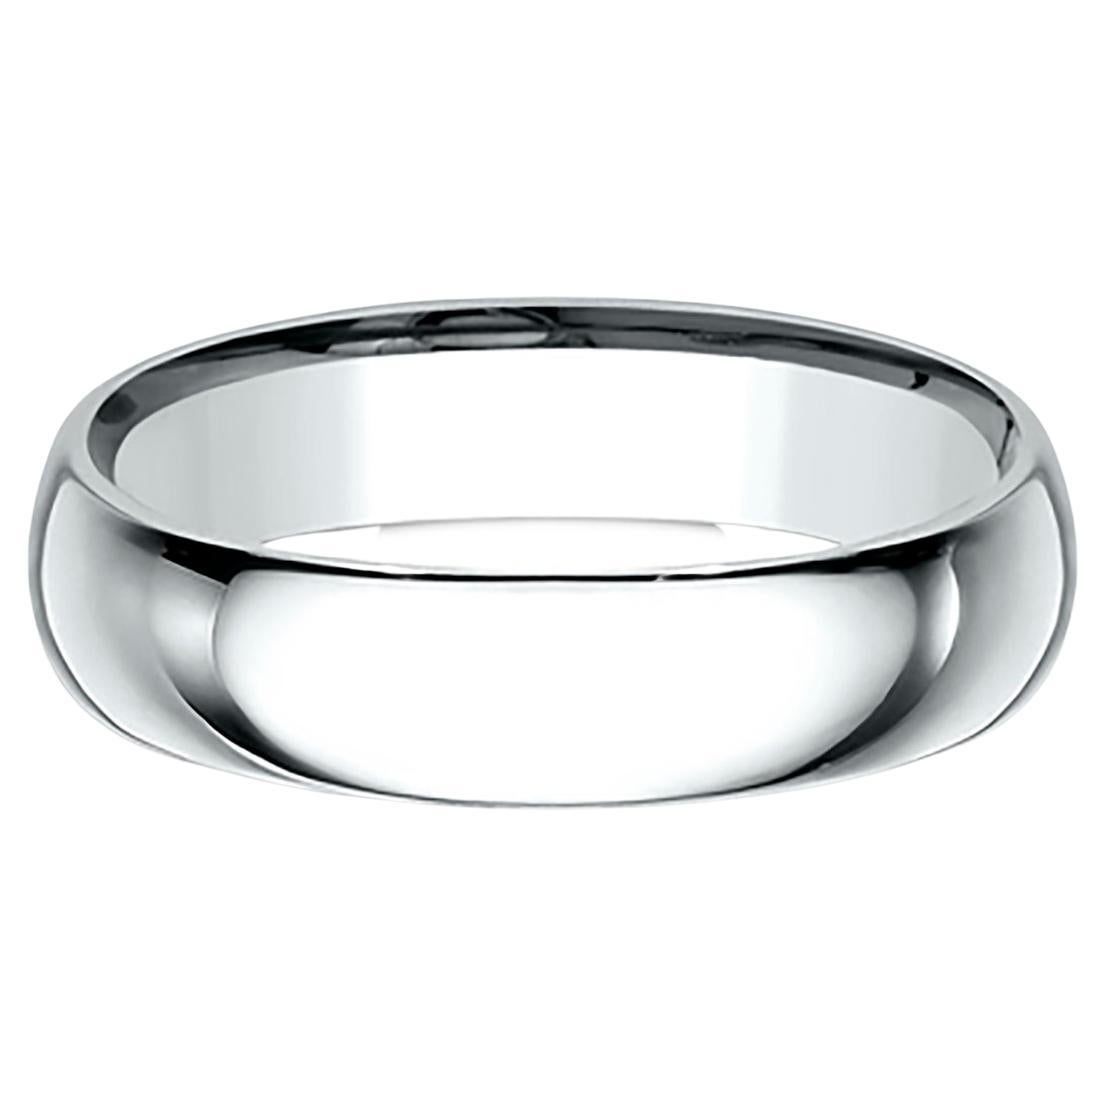 Benchmark Classic Comfort Fit Wedding Band in 14K White Gold, Width 5mm For Sale